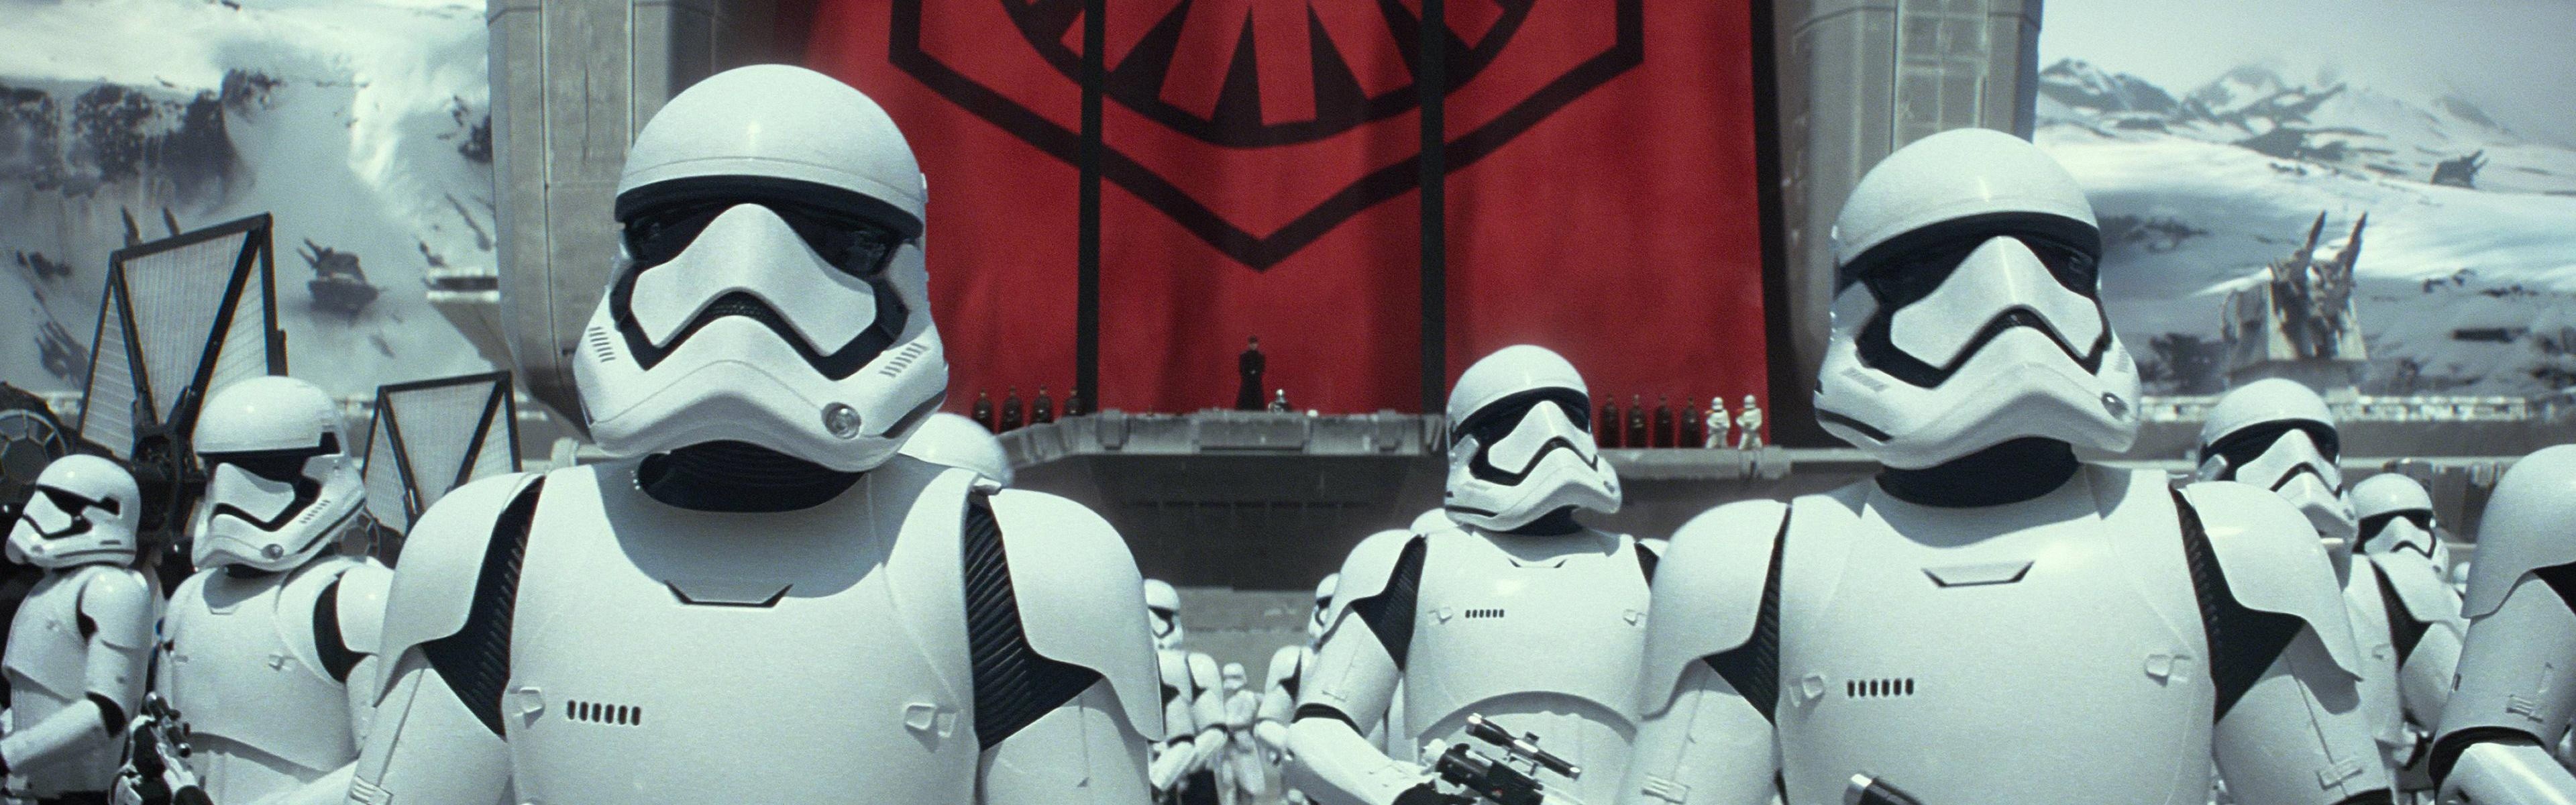 Dual Monitors Storm Troopers The First Order Soldier Stormtrooper Star Wars Star Wars The Force Awak 3840x1200